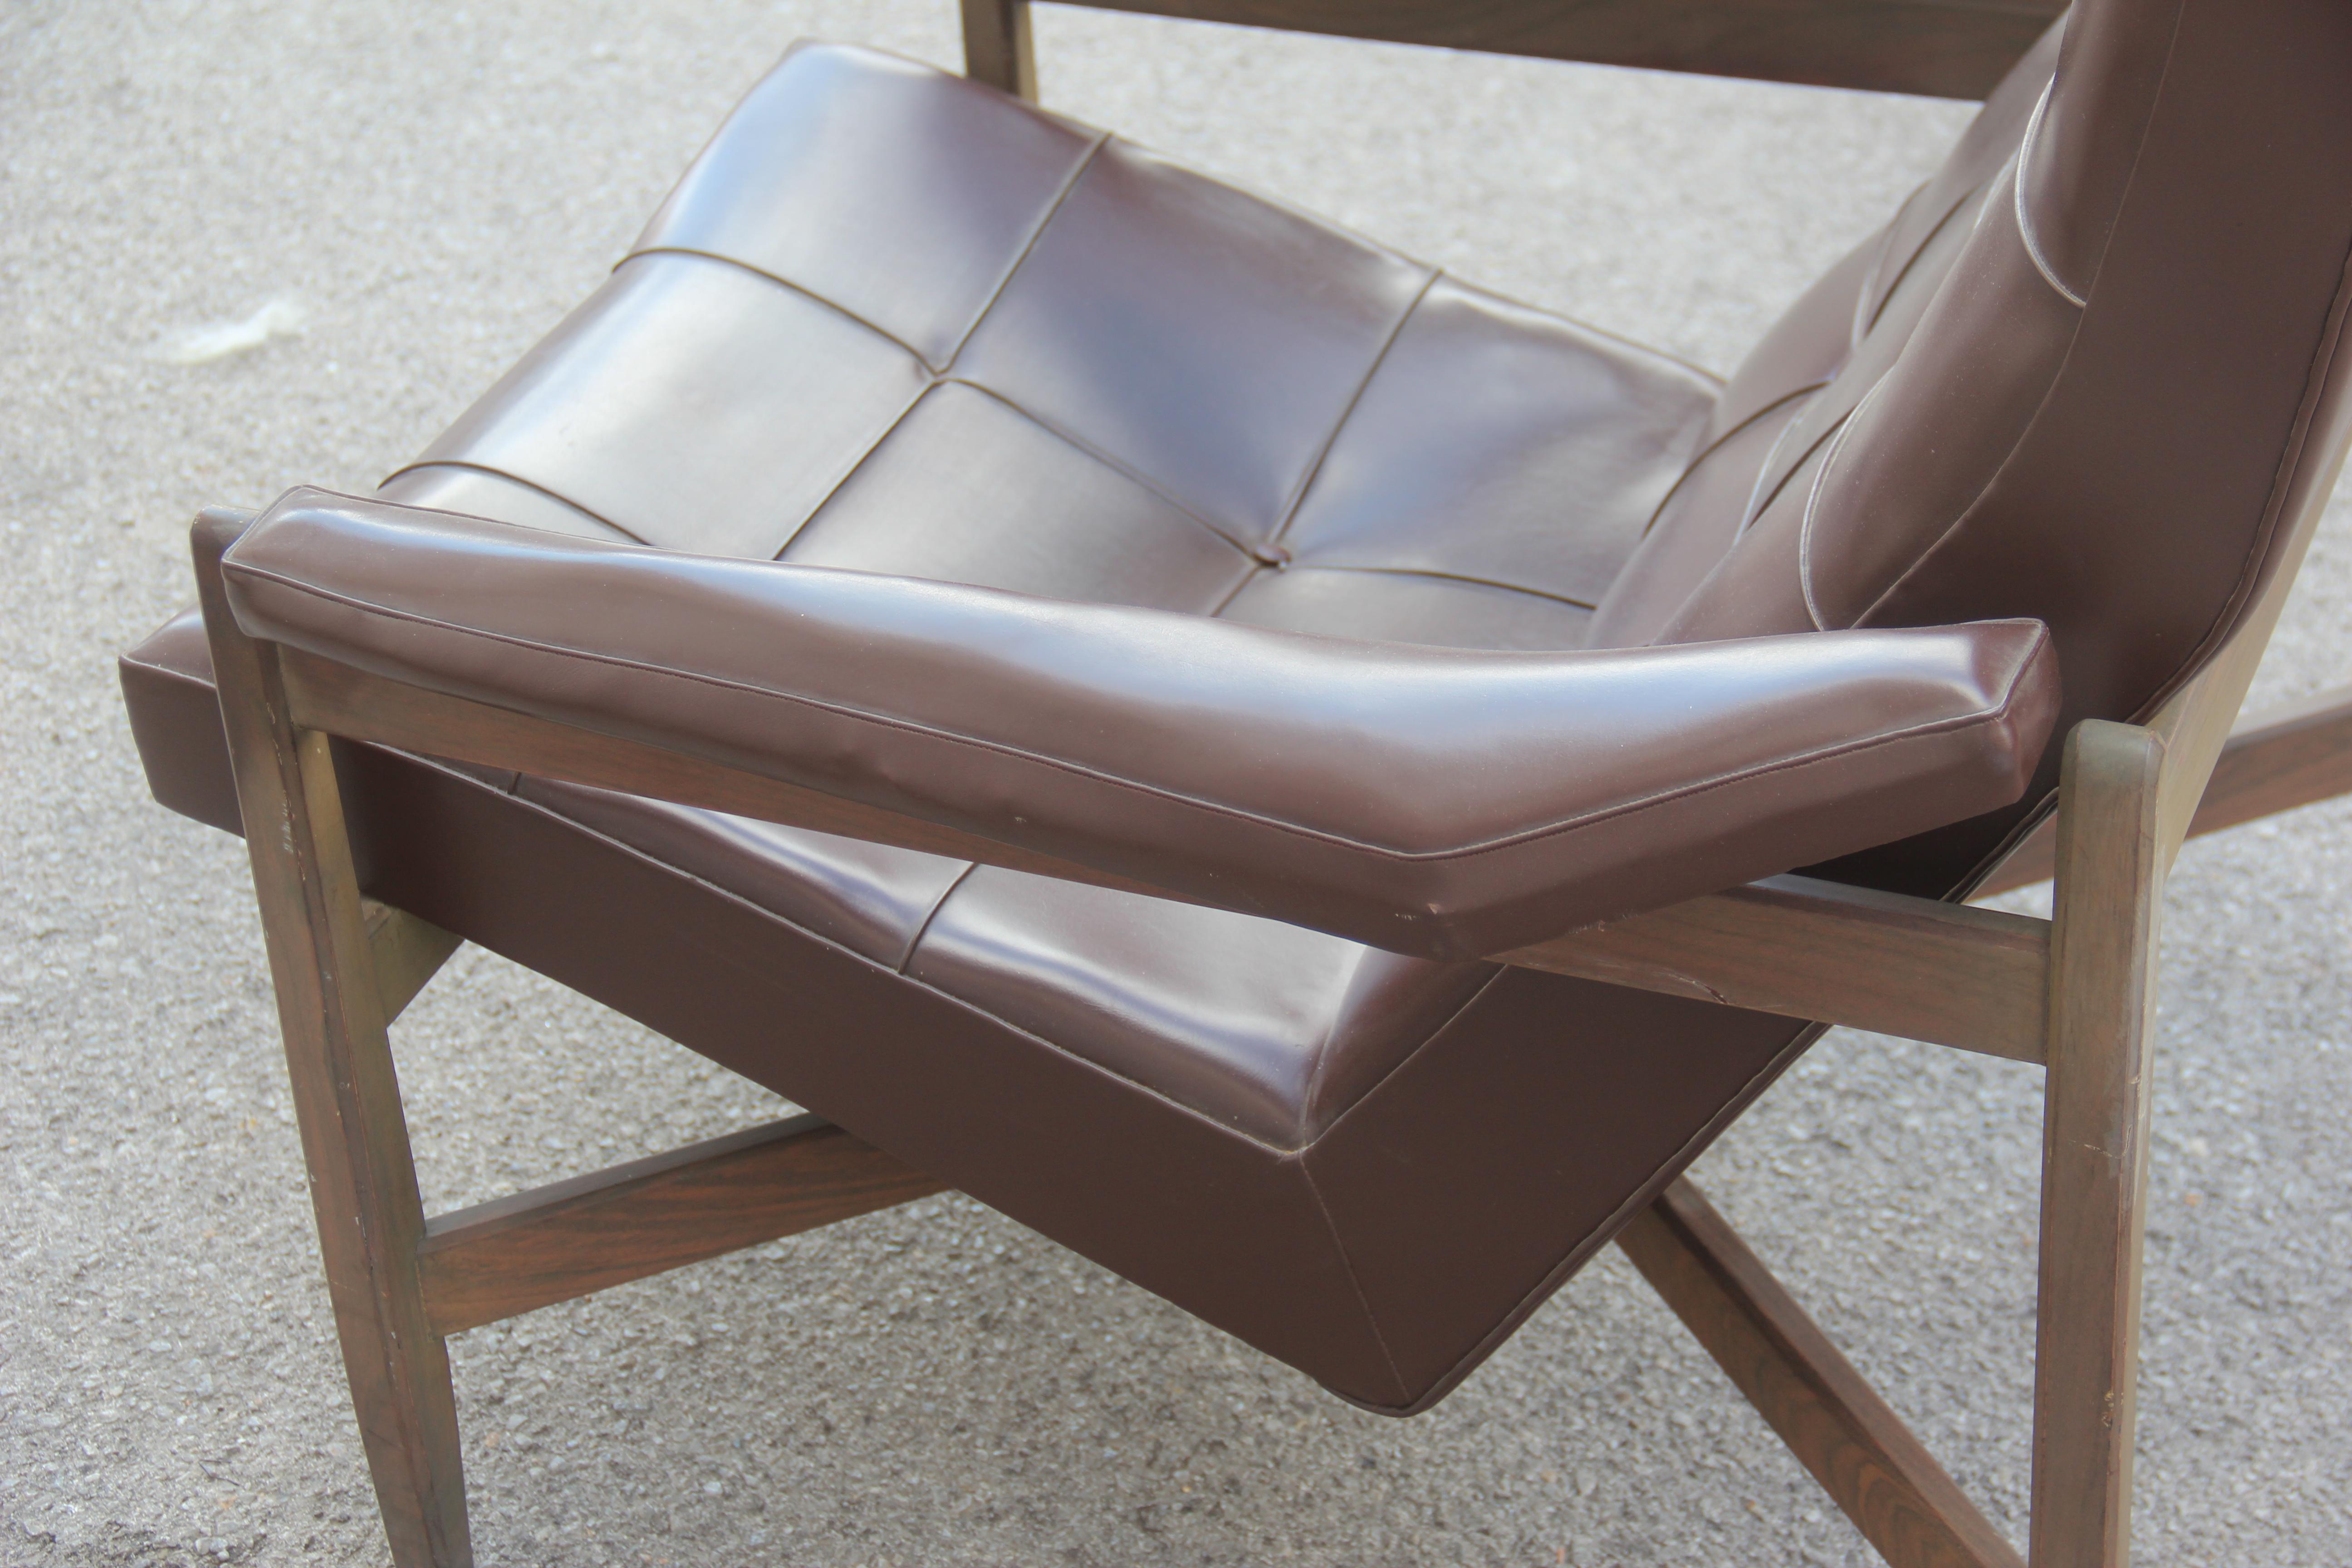 Midcentury Minotti Armchair Brown Color Italian Design 1950 Faux Leather For Sale 5